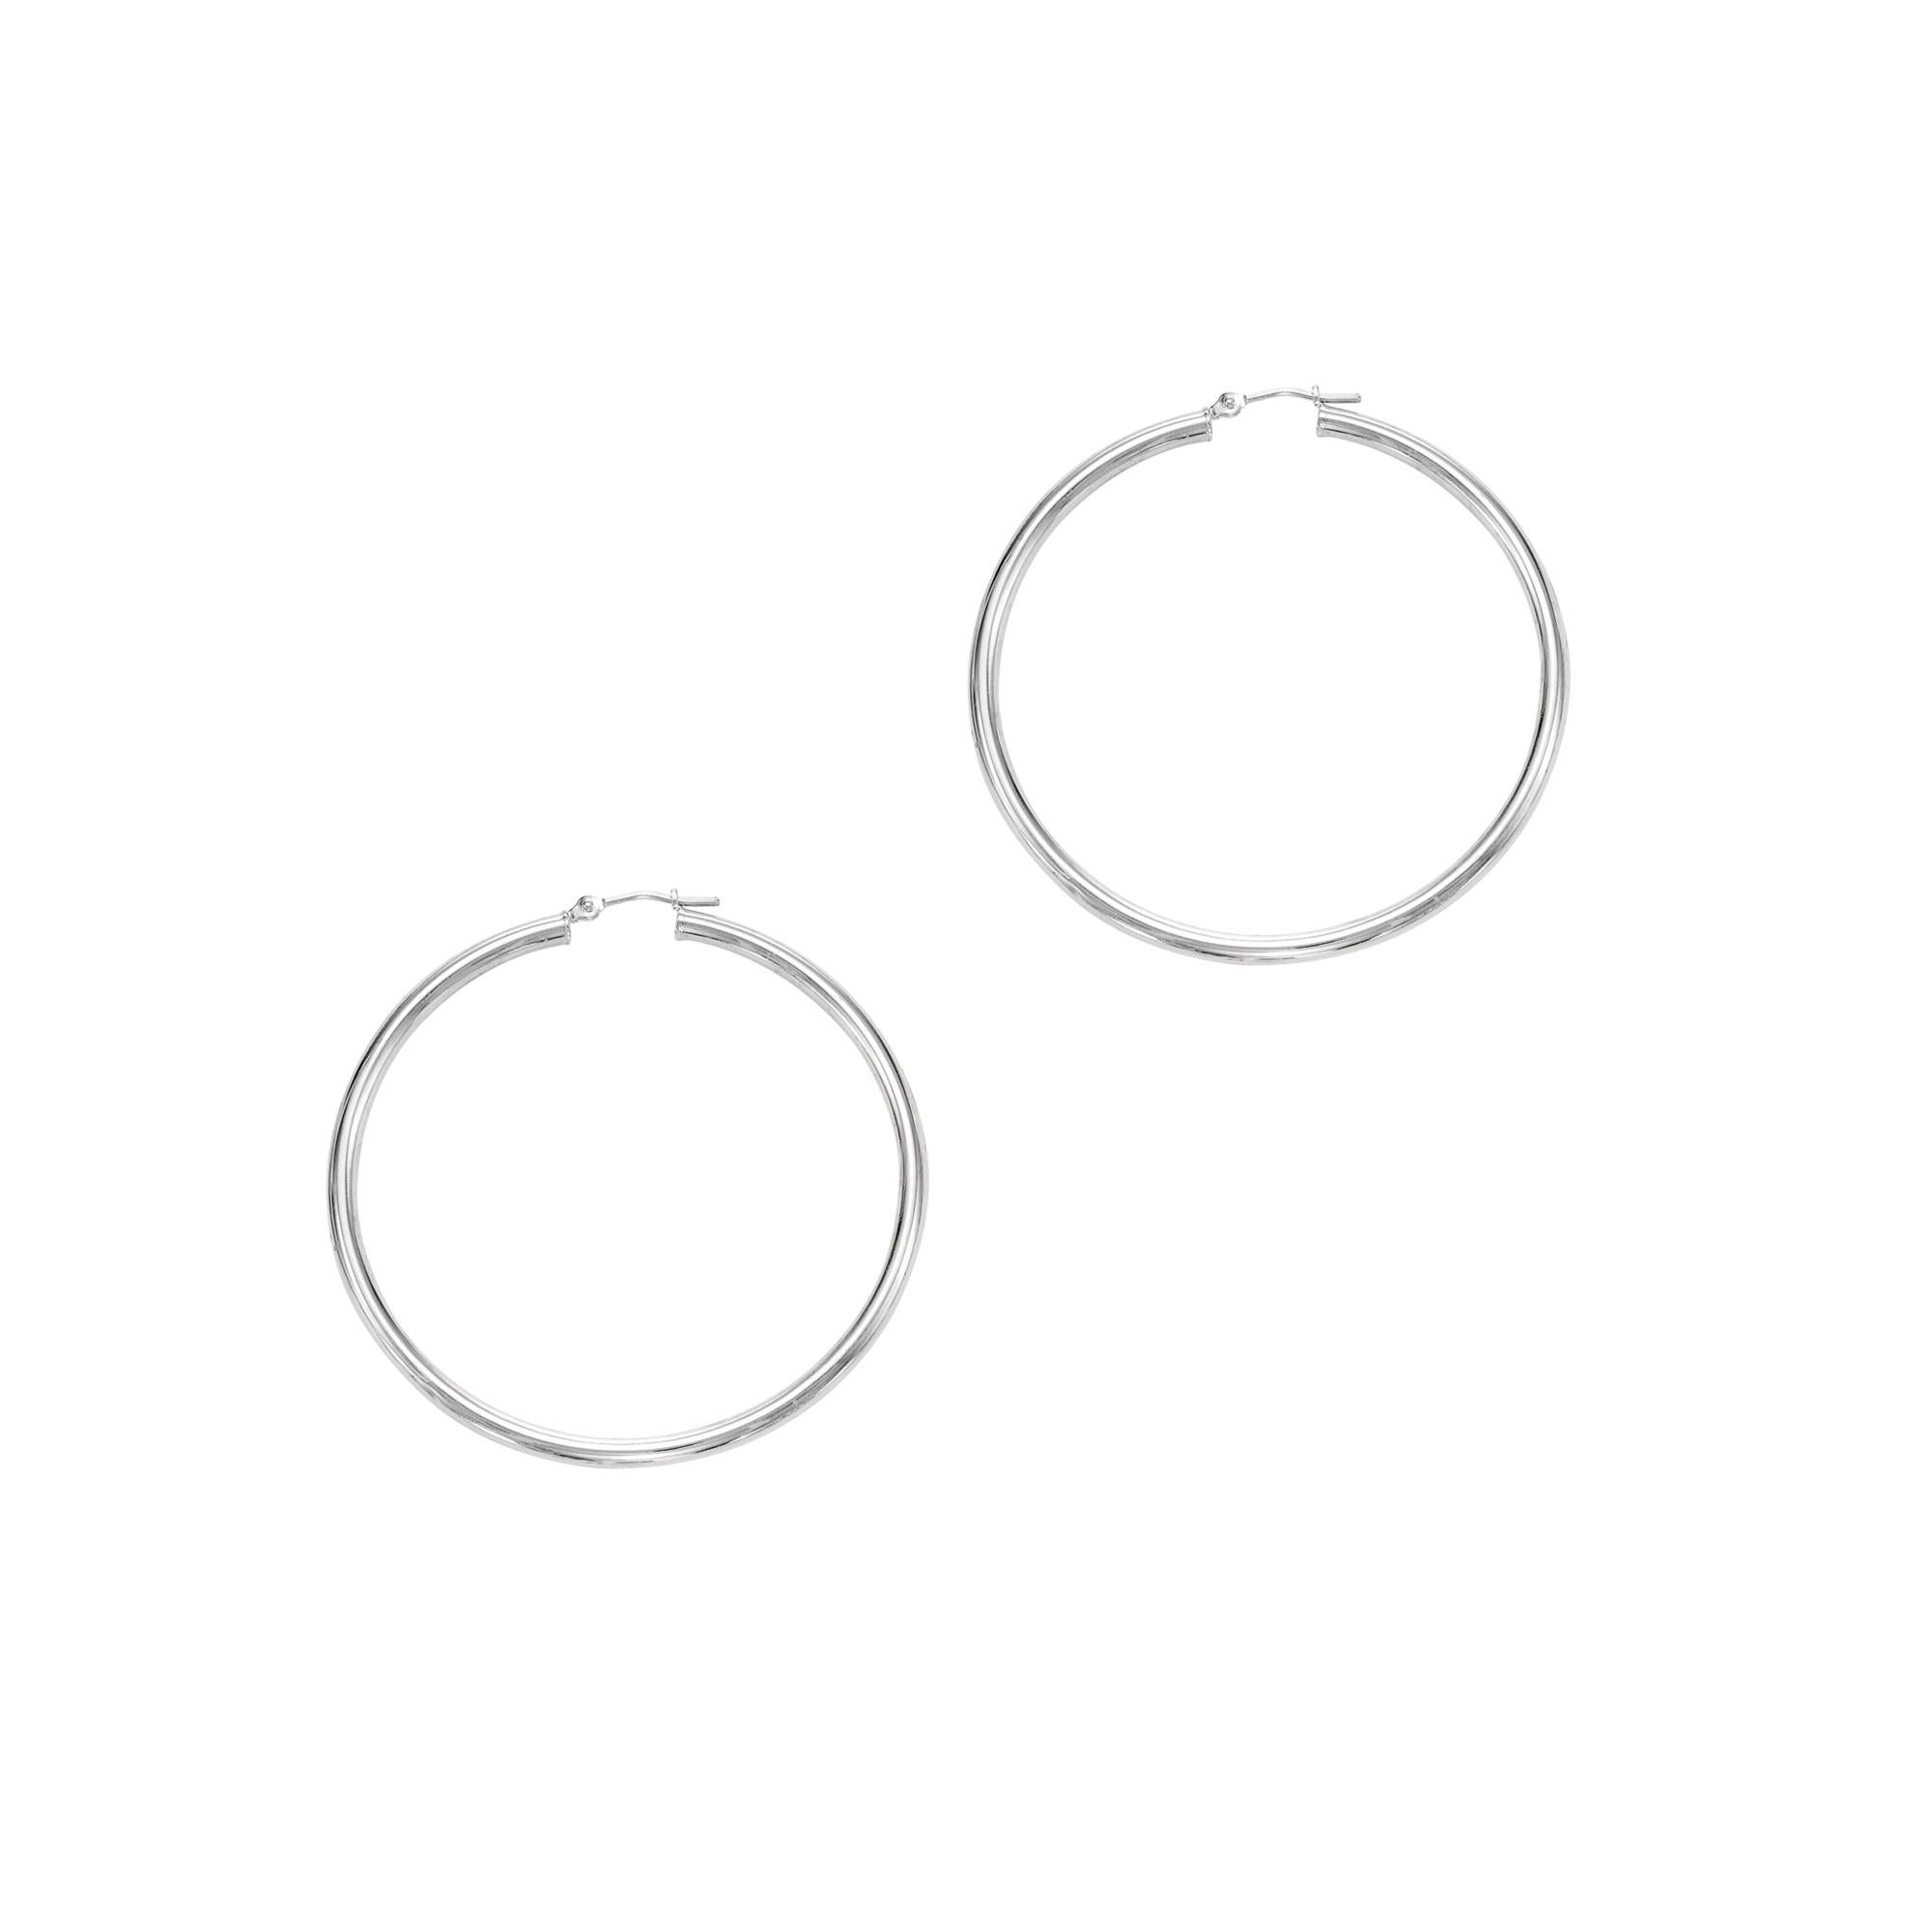 Fourteen karats yellow gold large circle hoop earrings
Earrings 2.25-inch diameter
Width of the circle 3 millimeter equals 0.12 inch
Also available in 14 karat white, prices may vary
New Earrings
The latest and innovative fashion collections have